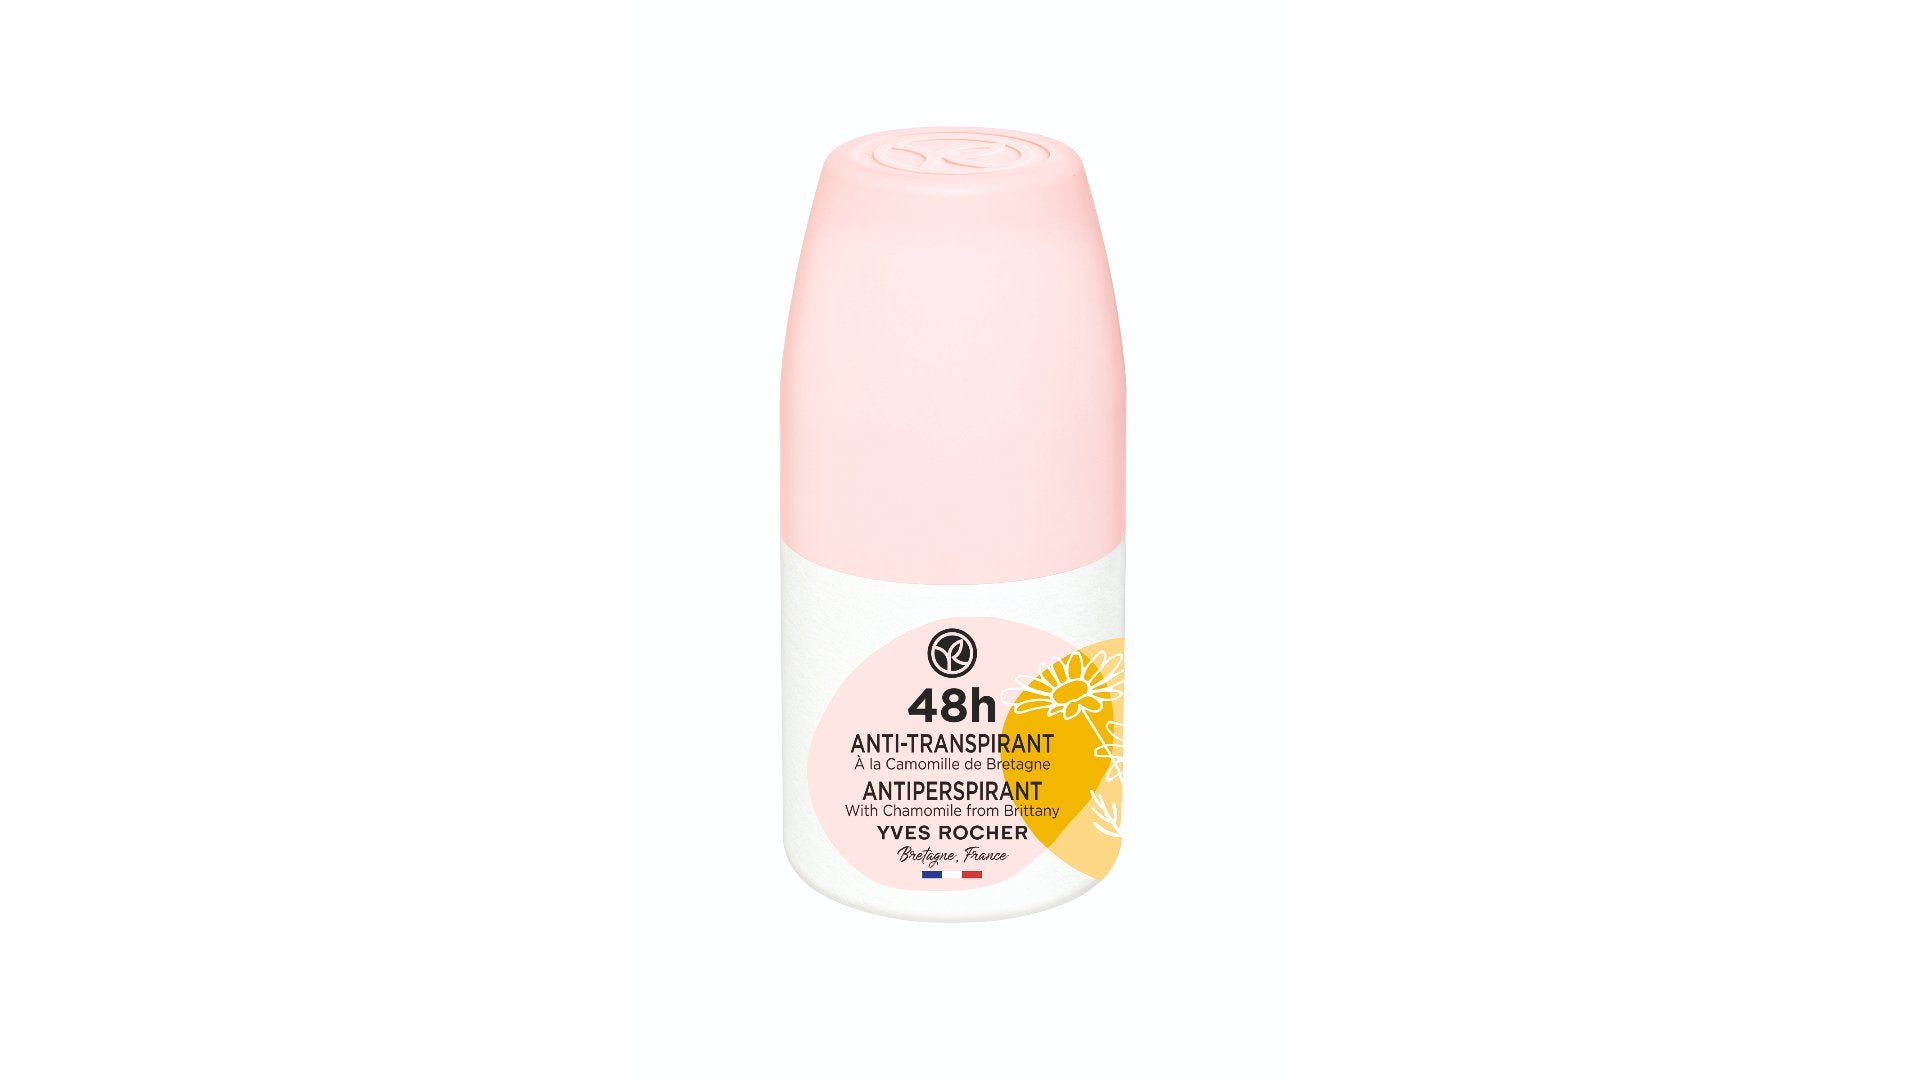 48H ANTIPERSPIRANT CAMOMILE FROM BRITTANY ALL SKIN TYPES ROLL ON 50ML - Yves Rocher Azerbaijan